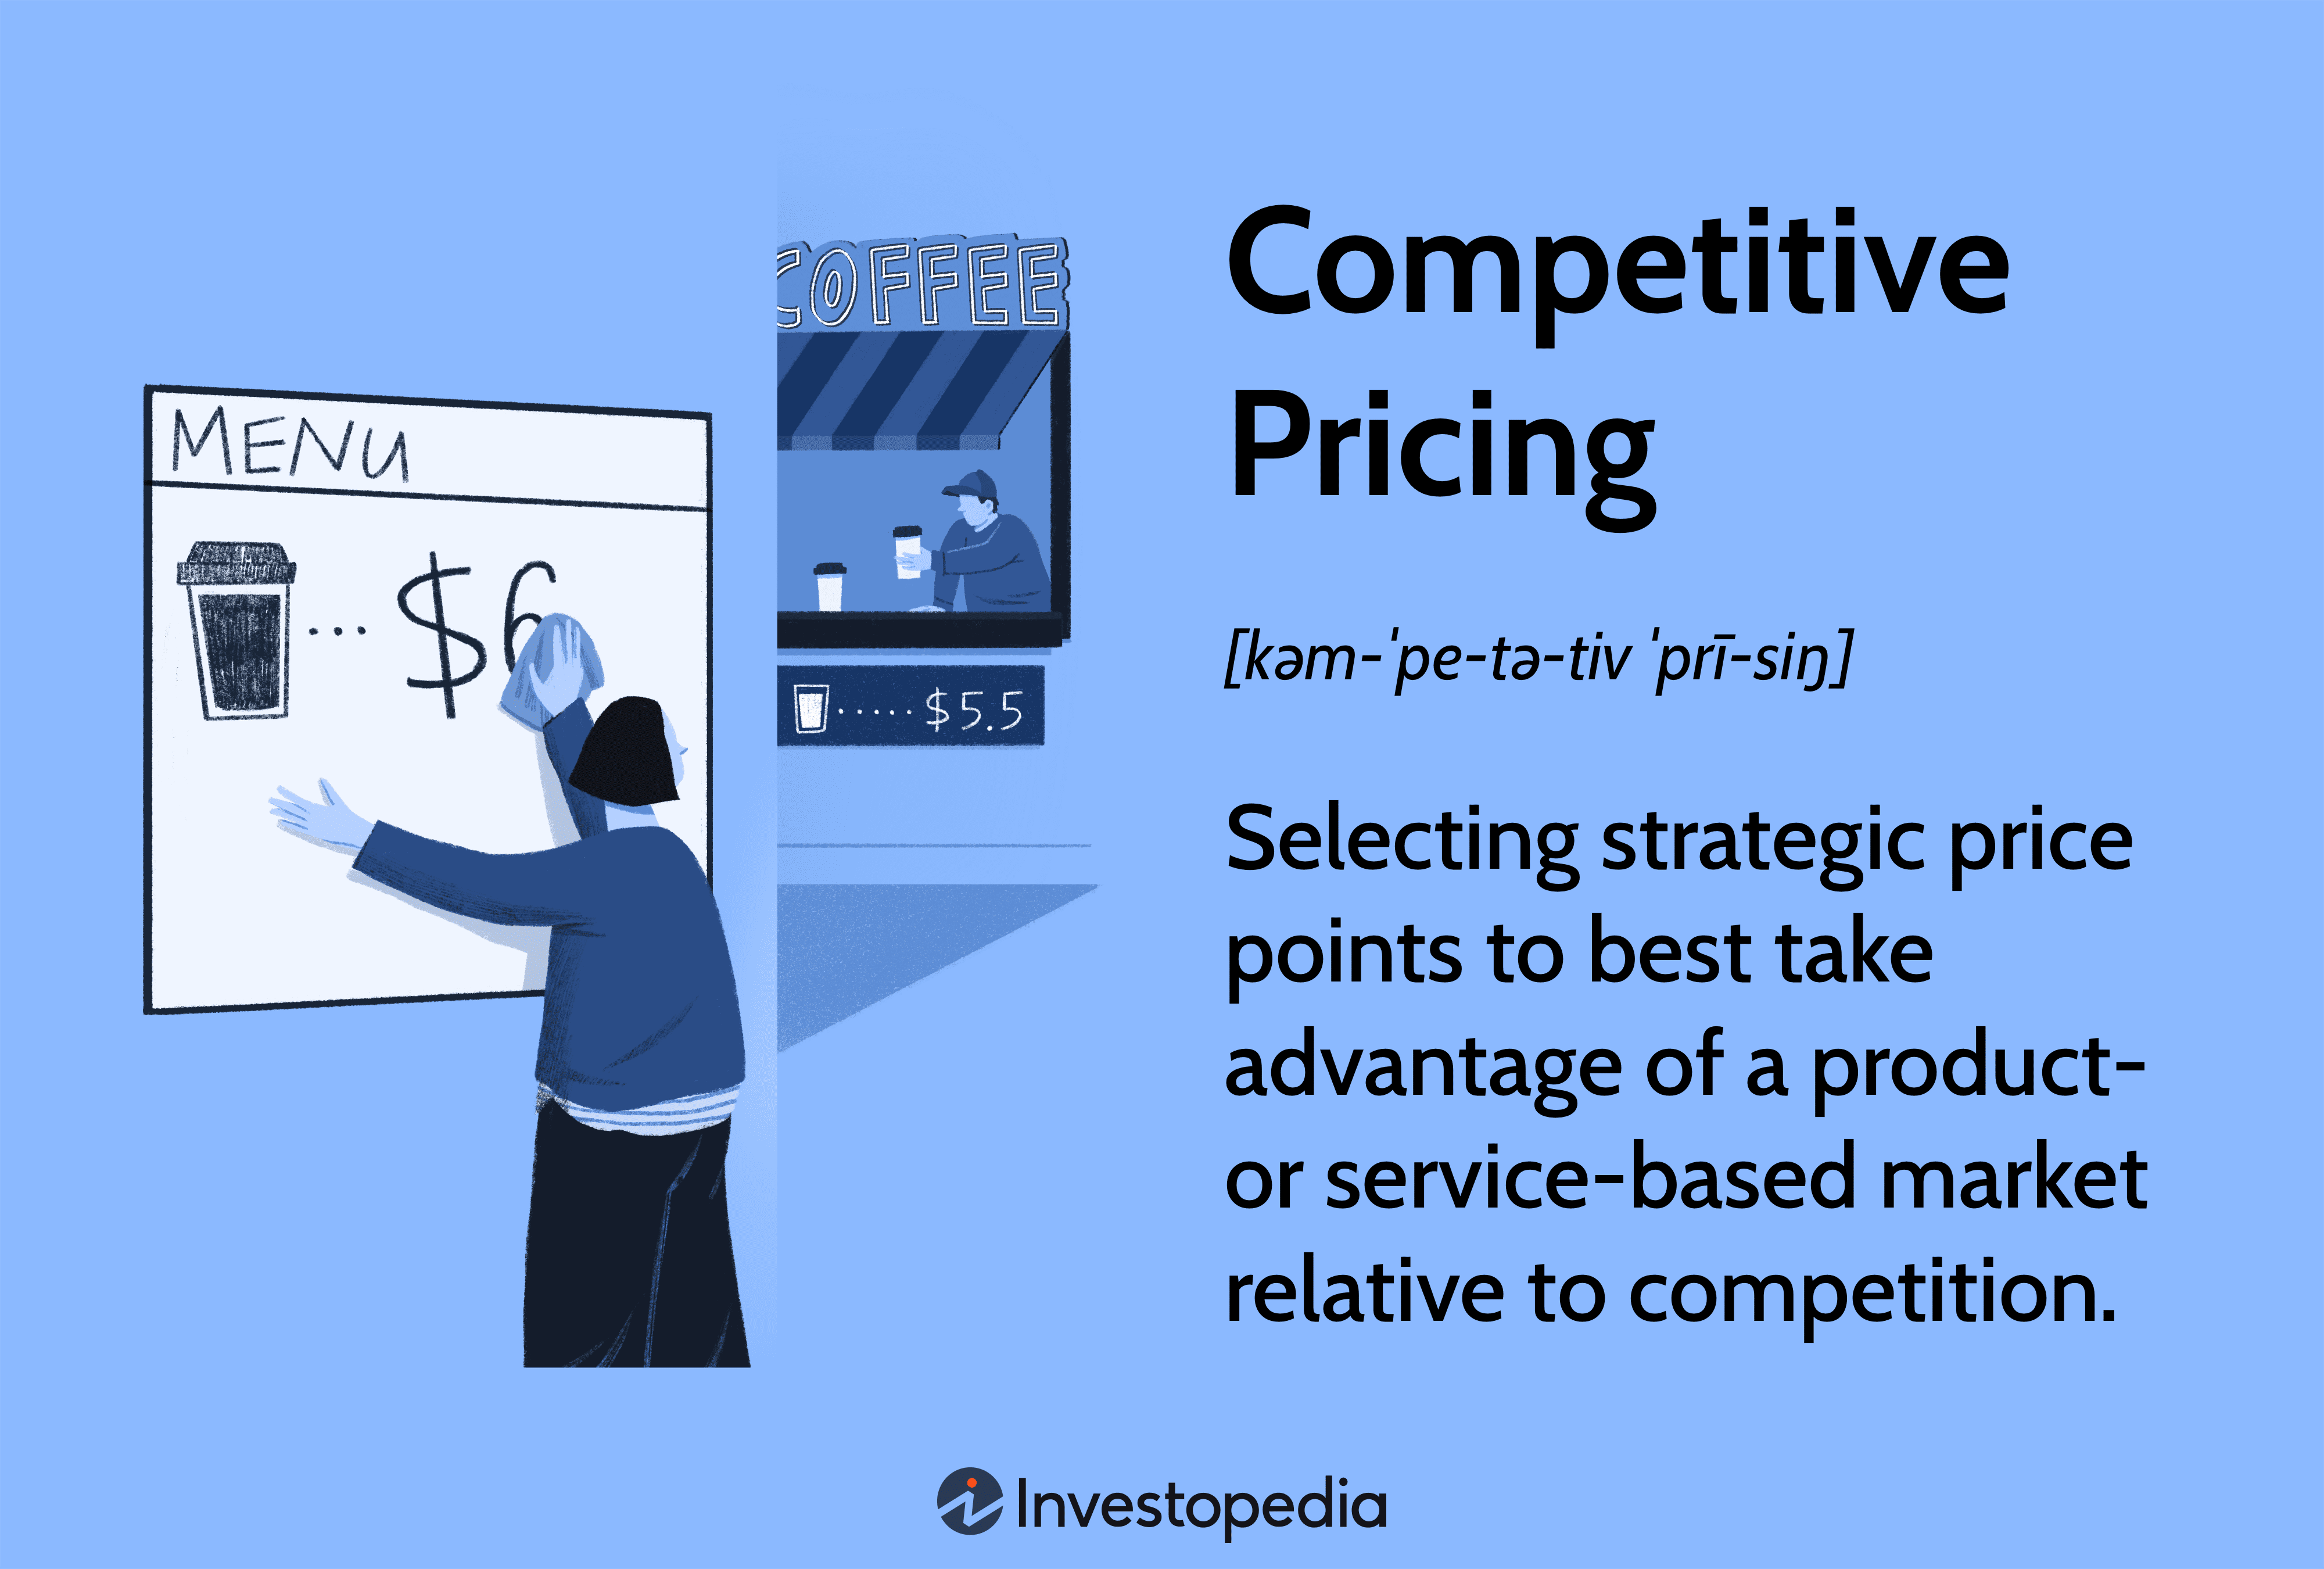 Competitive Pricing: Selecting strategic price points to best take advantage of a product or service based market relative to competition.